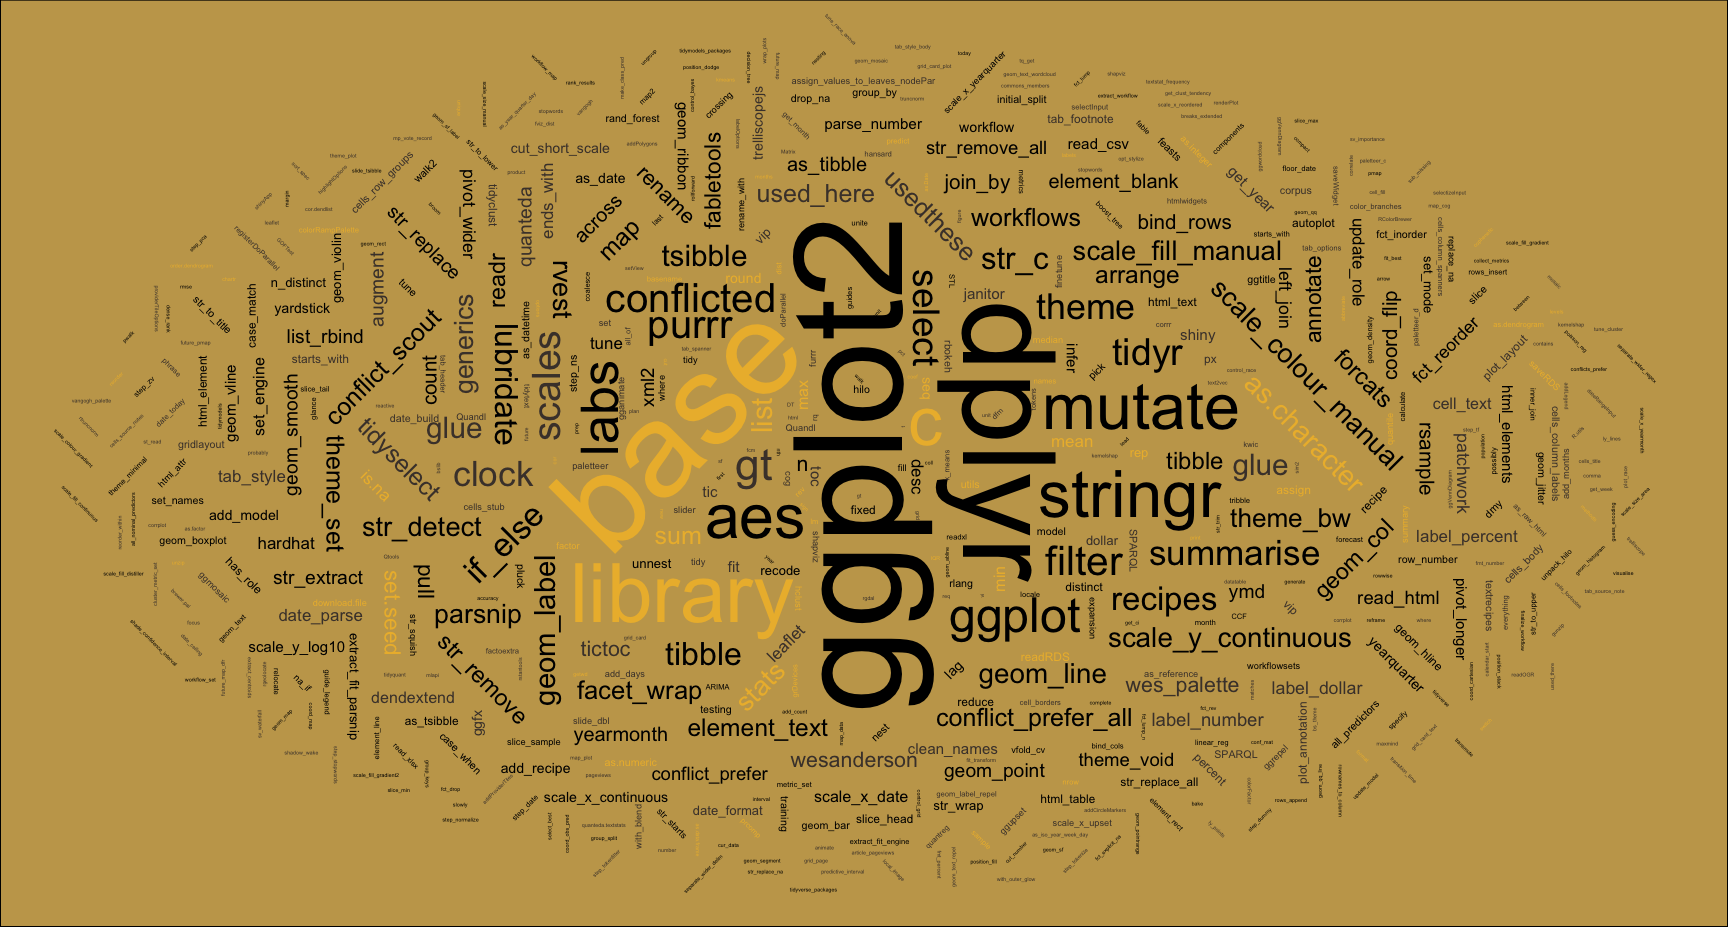 Wordcloud emphasising this site's most used R packages and functions